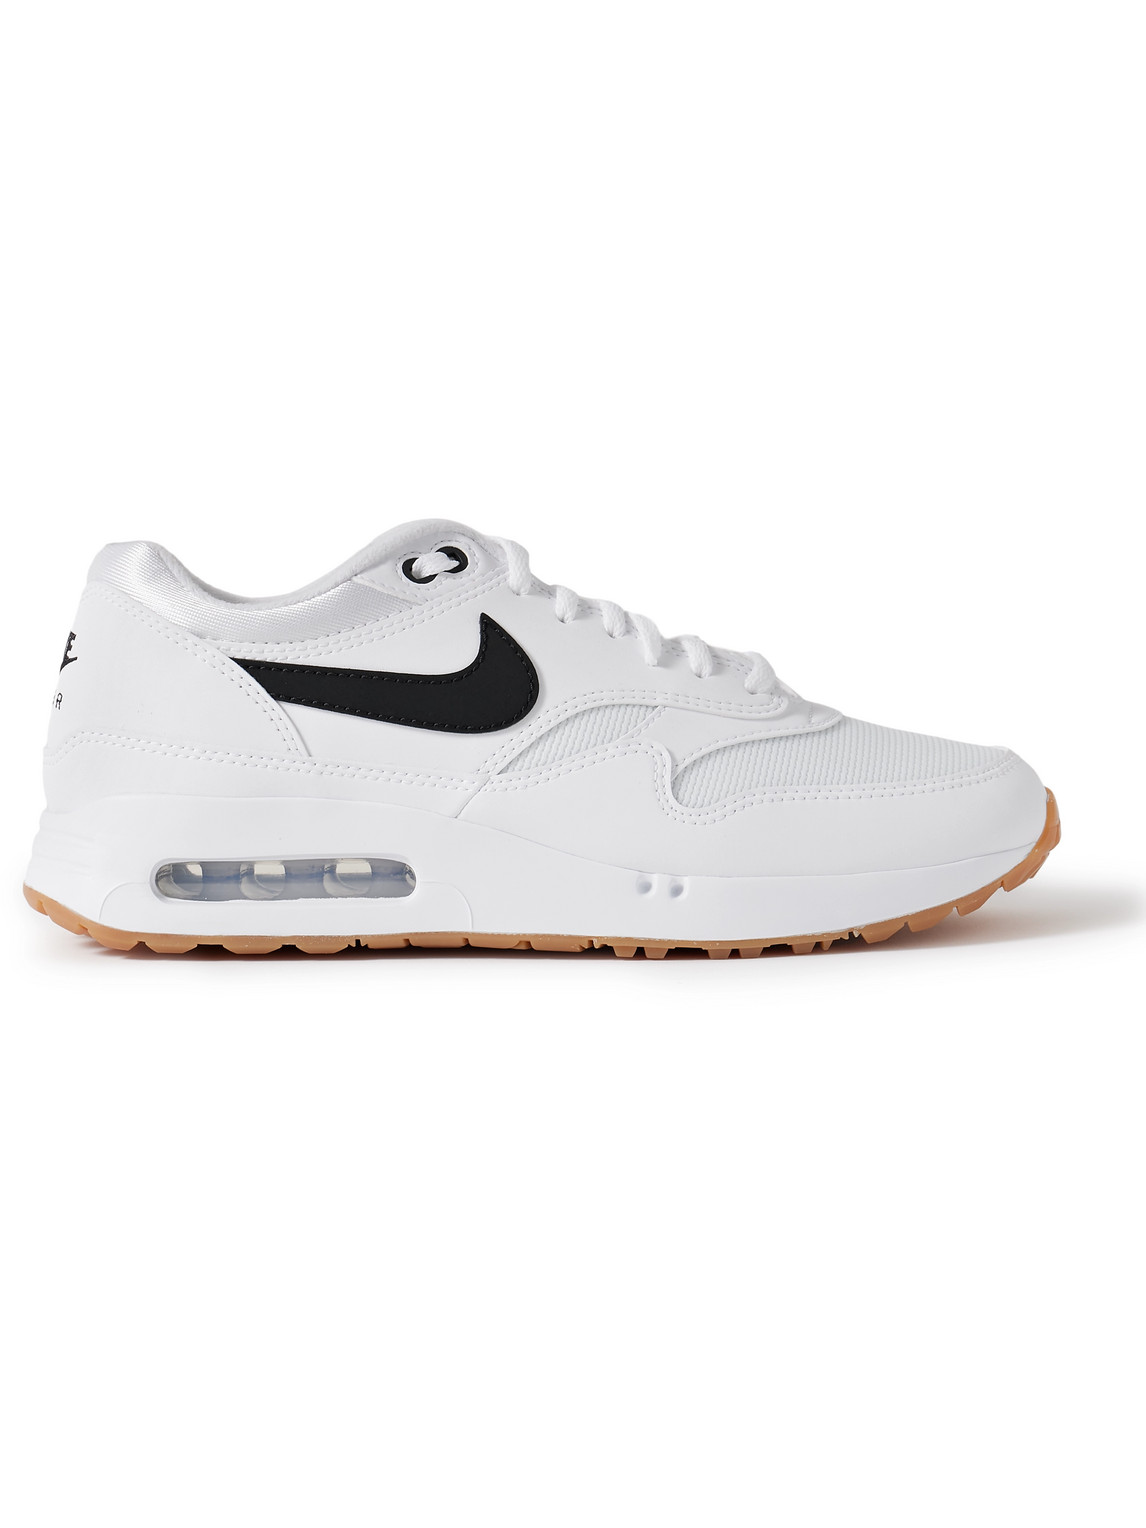 Nike Air Max 1 '86 Og G Leather And Mesh Golf Sneakers In White